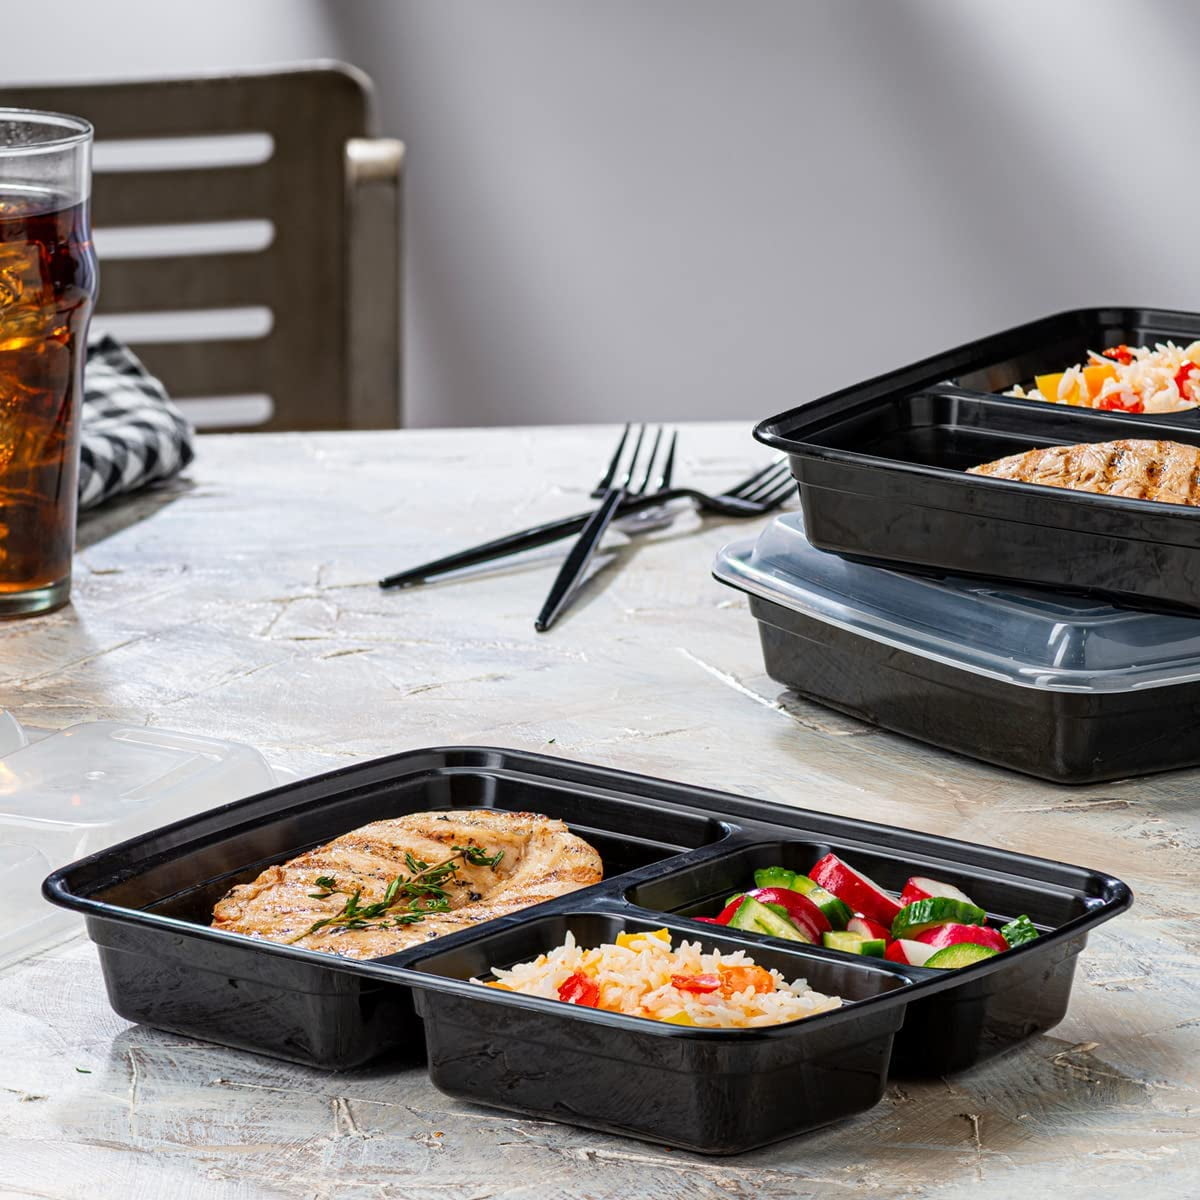 Heim Concept 3 Compartment Meal Prep Containers with Lids (Set of